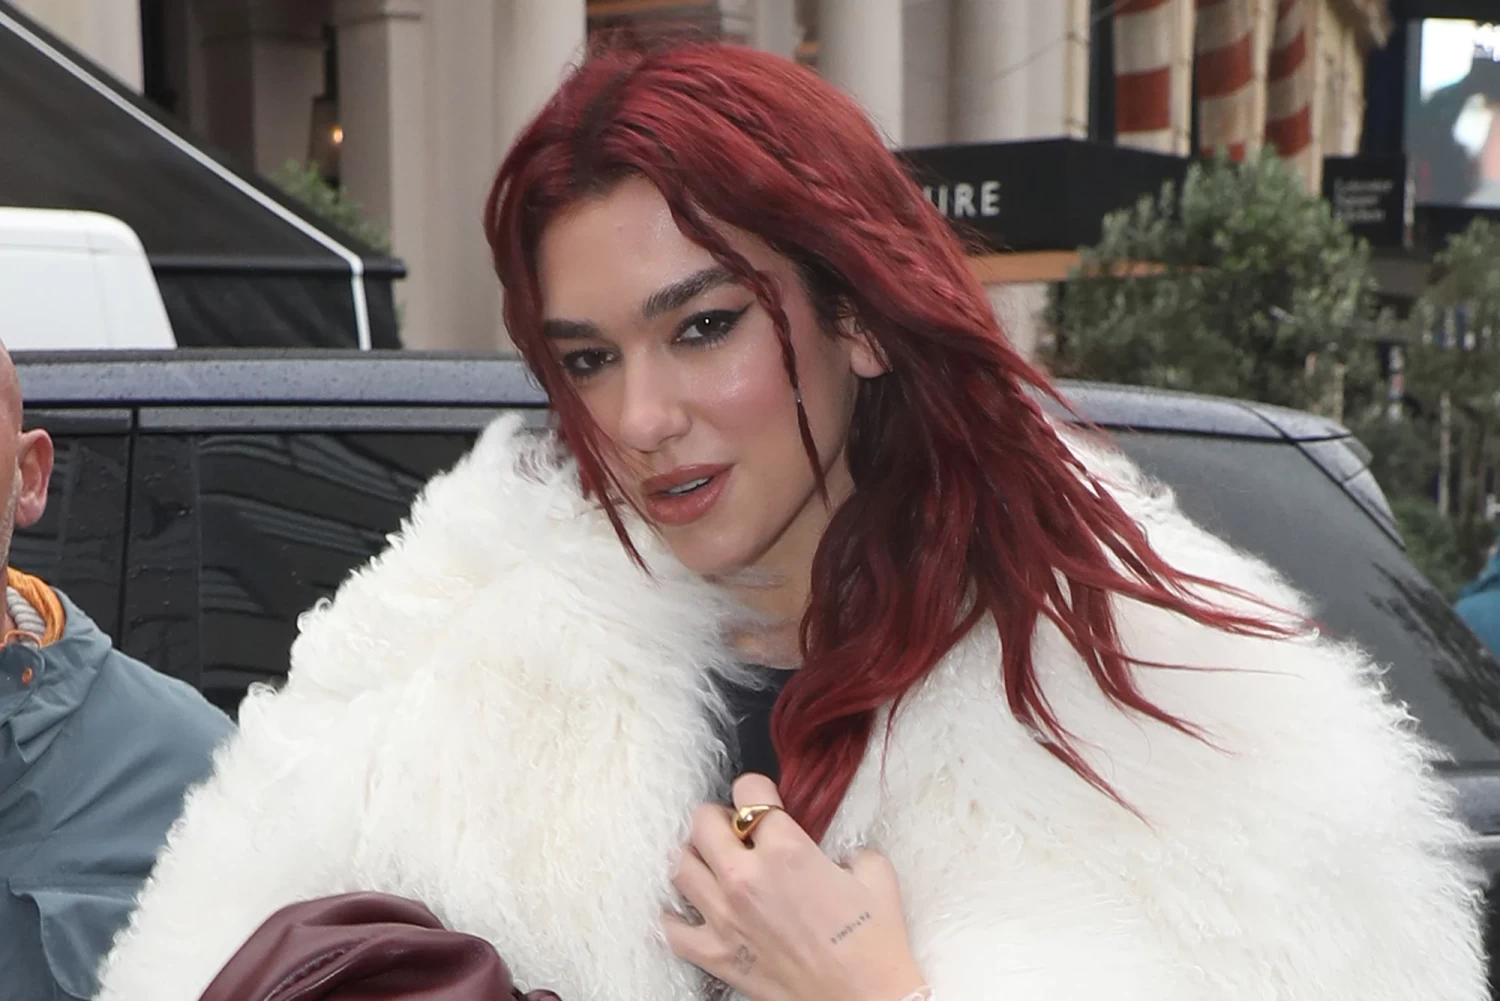 Dua Lipa is the latest celebrity to debut cherry-colored tresses this autumn. Neil Mockford/GC Images/Getty Images